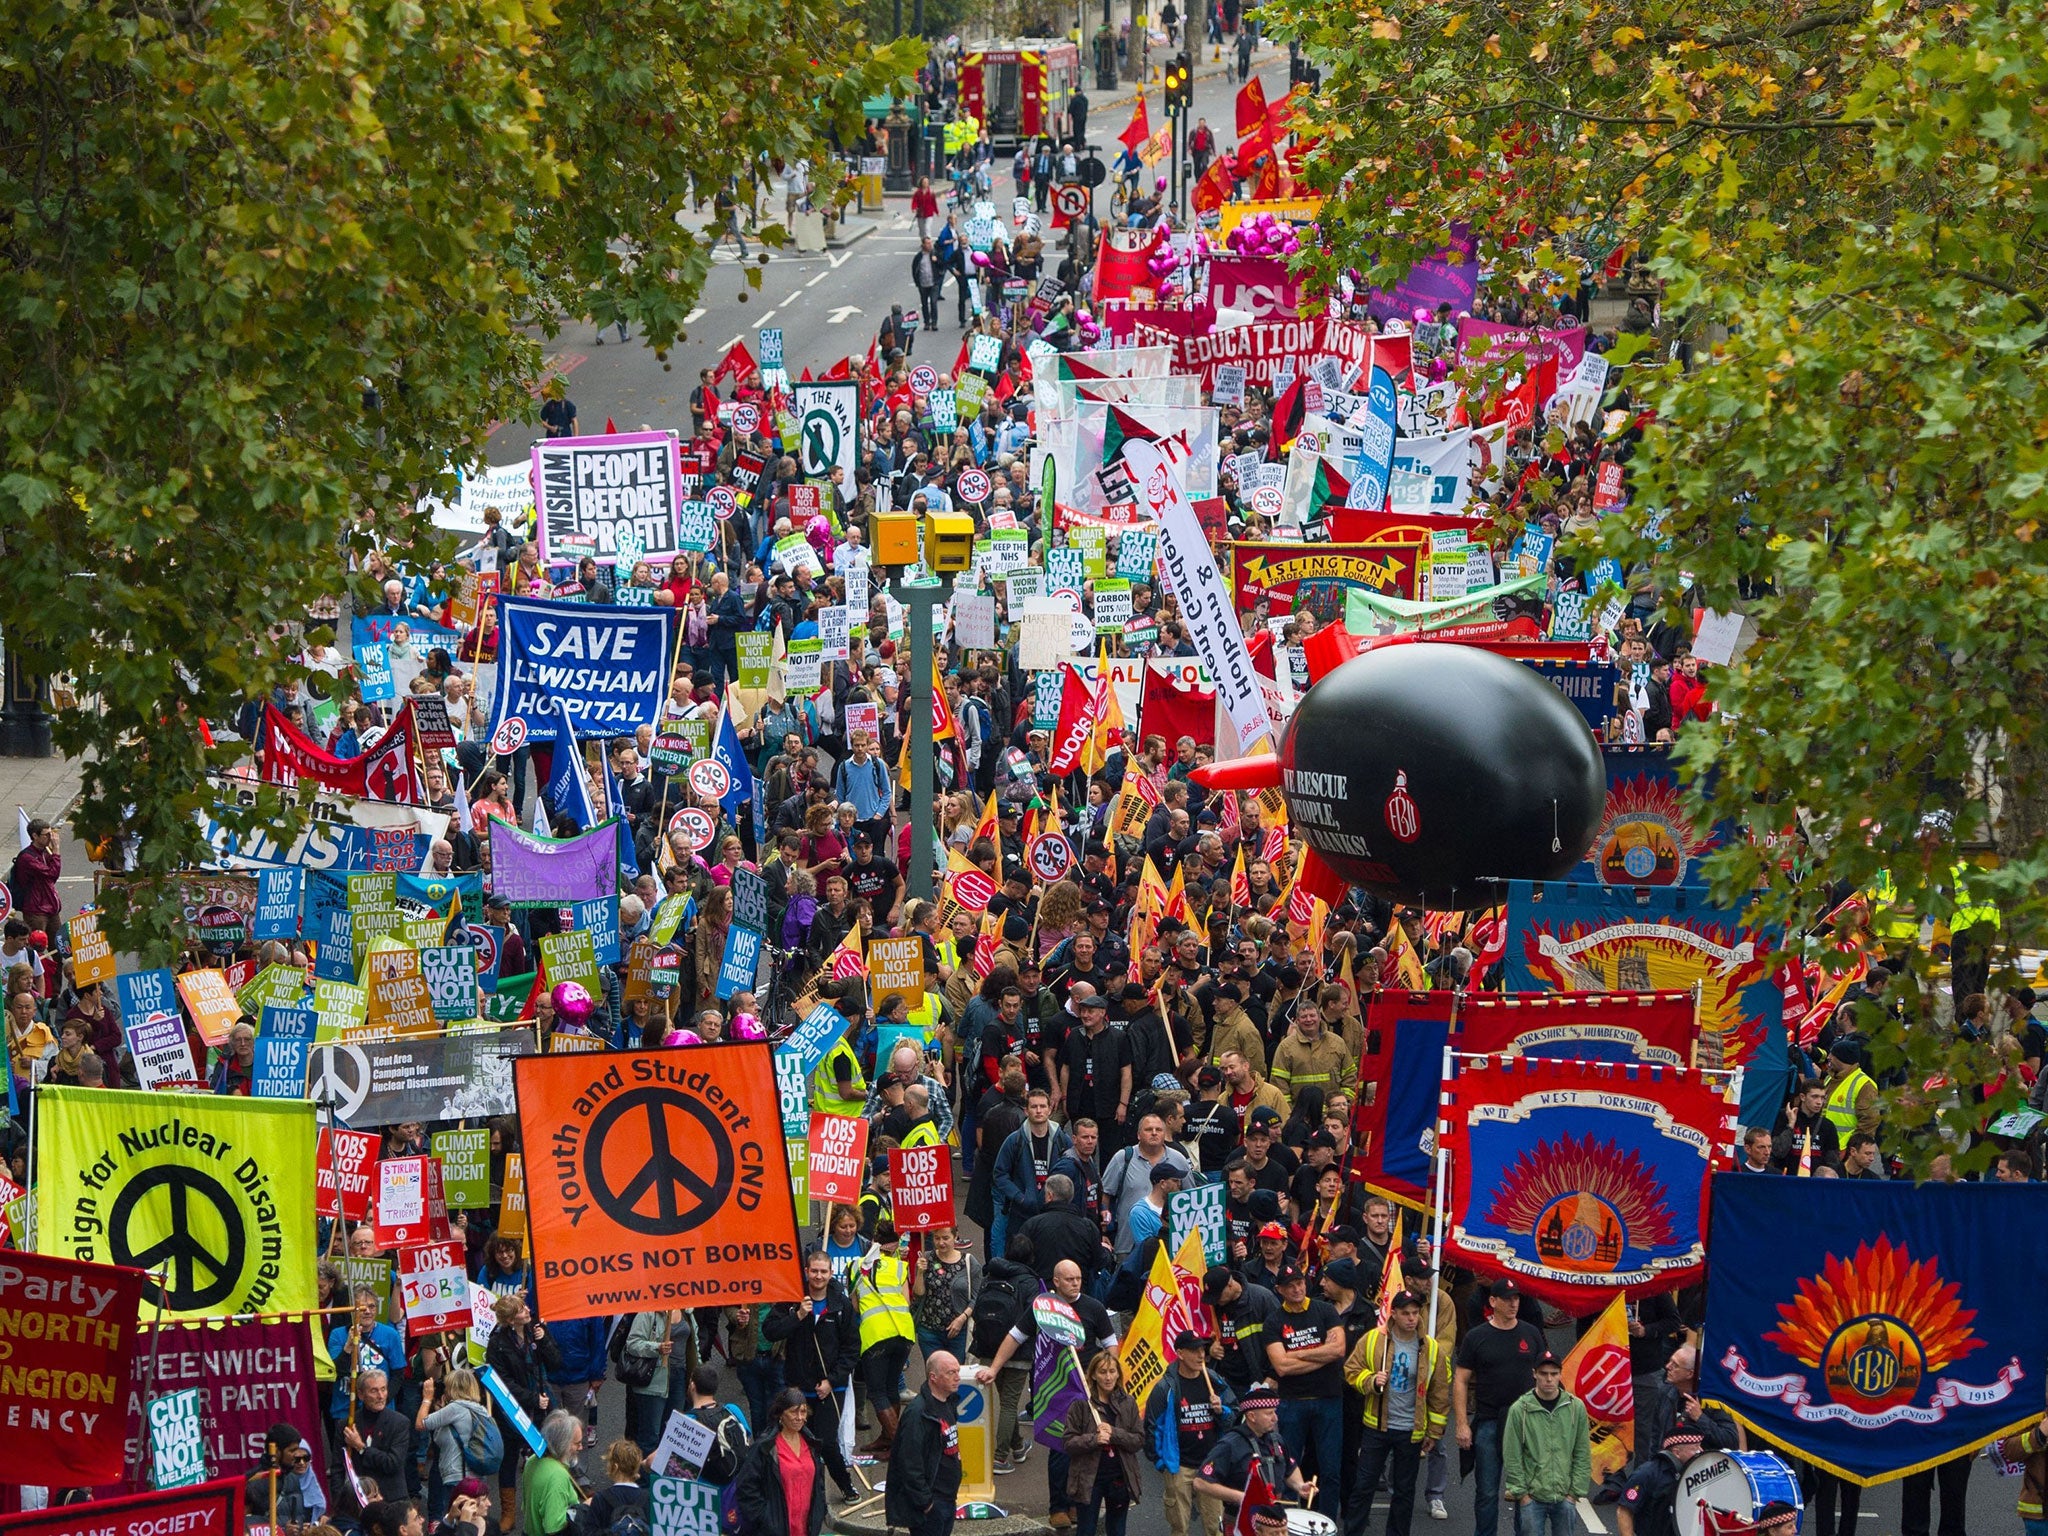 Protesters march through London as part of the TUC 'Britain Needs a Pay Rise' demonstration